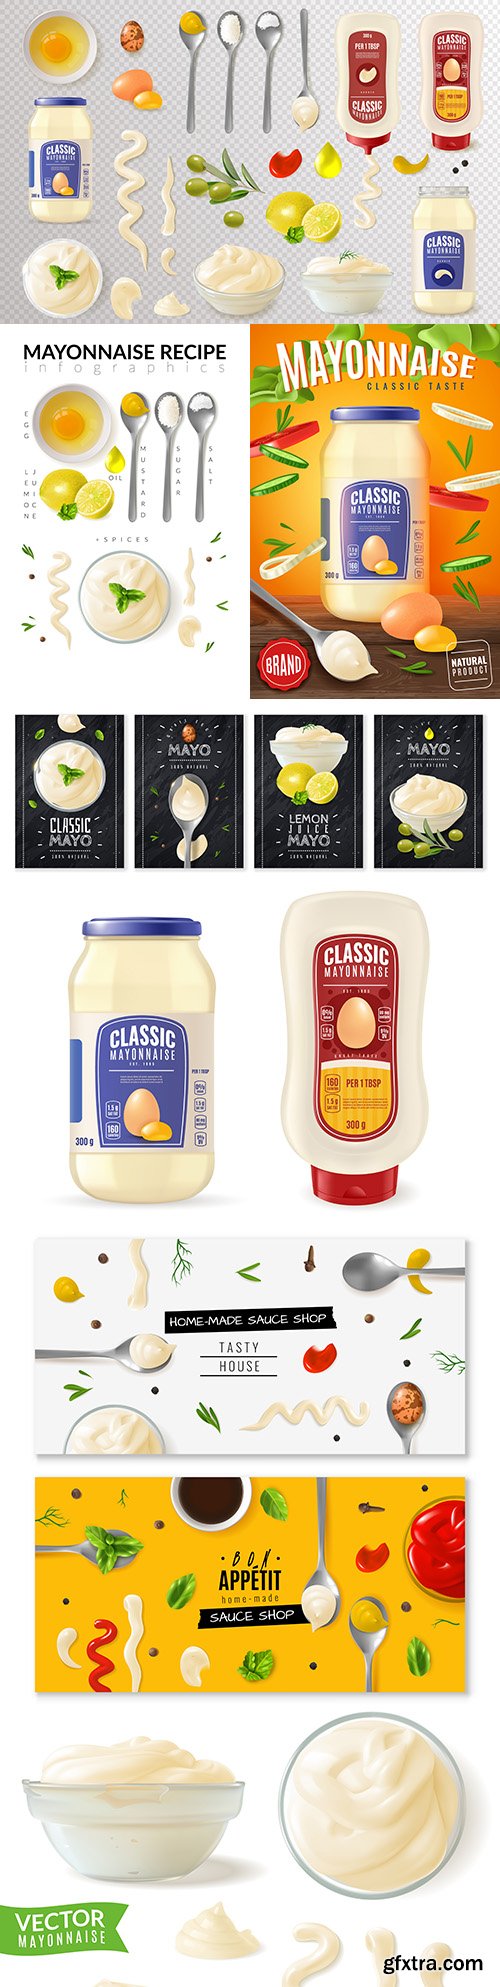 Realistic illustrations of glass can mayonnaise and recipe